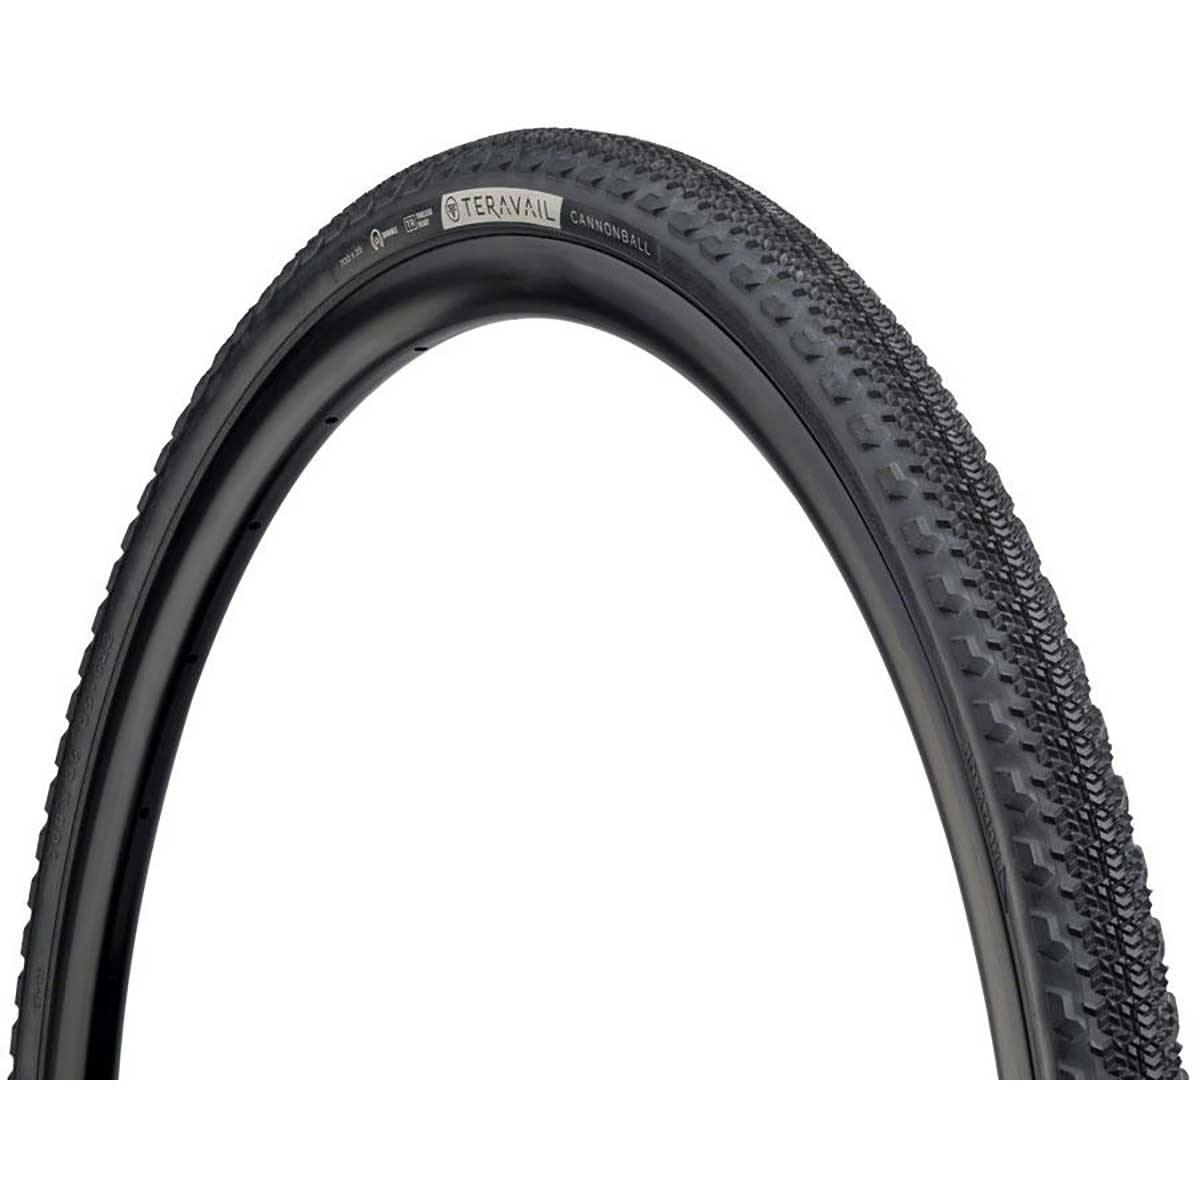 Teravail Cannonball Tire Tubeless, Folding, Black Sidewall, Light And Supple · 700c x 35mm